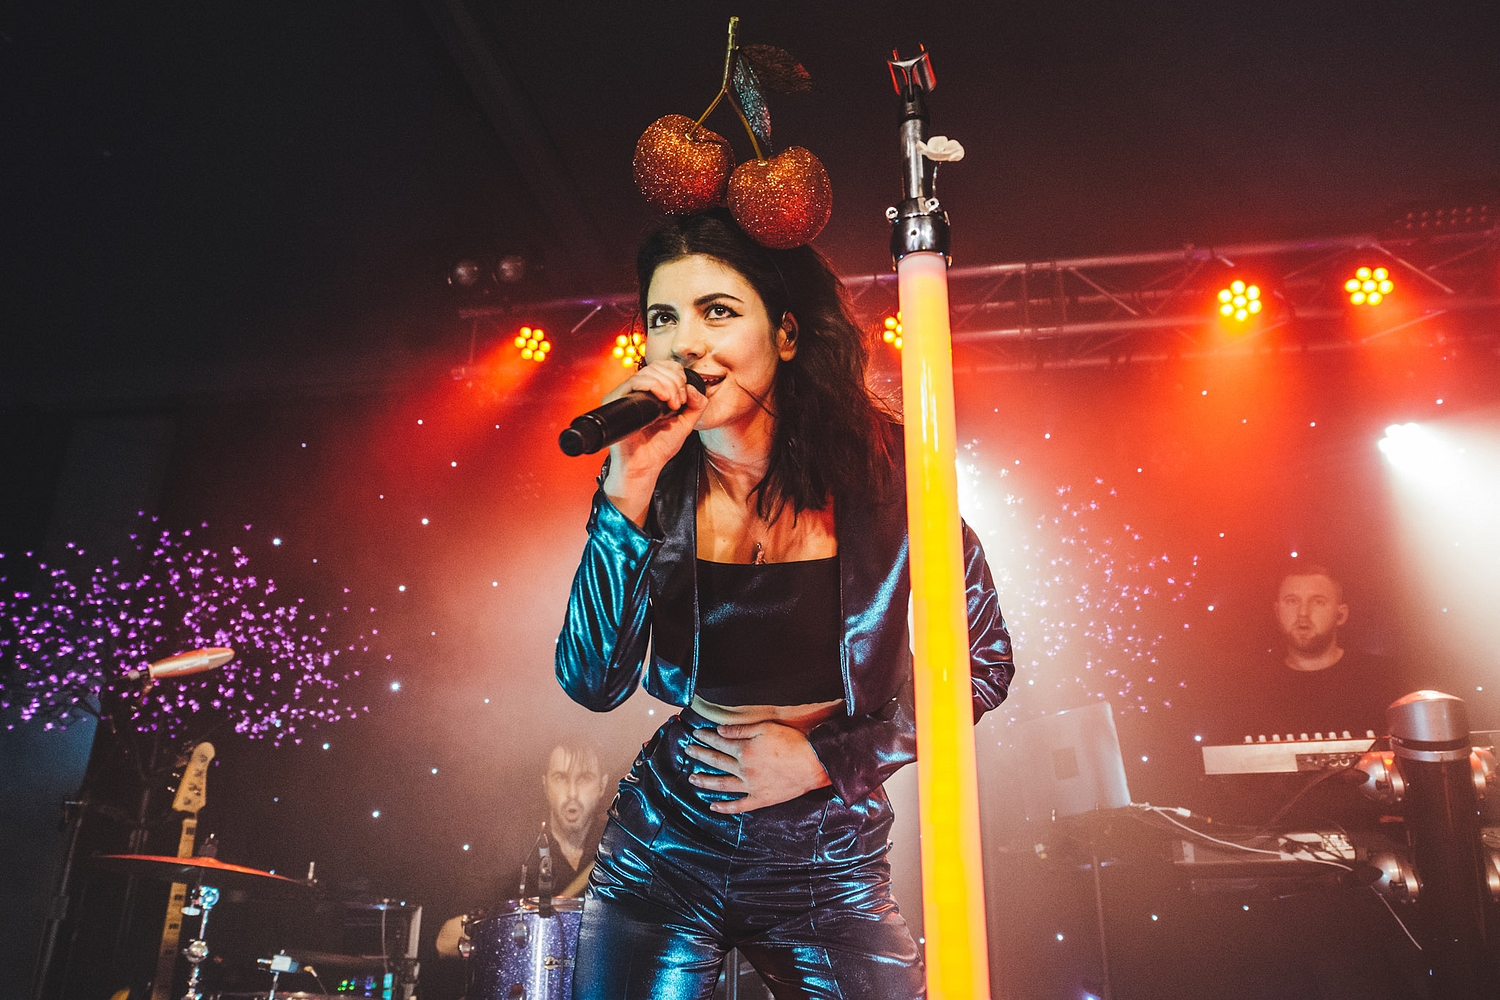 ​Watch live sets from Marina and the Diamonds, George Ezra, A$AP Rocky & more at Lollapalooza 2015